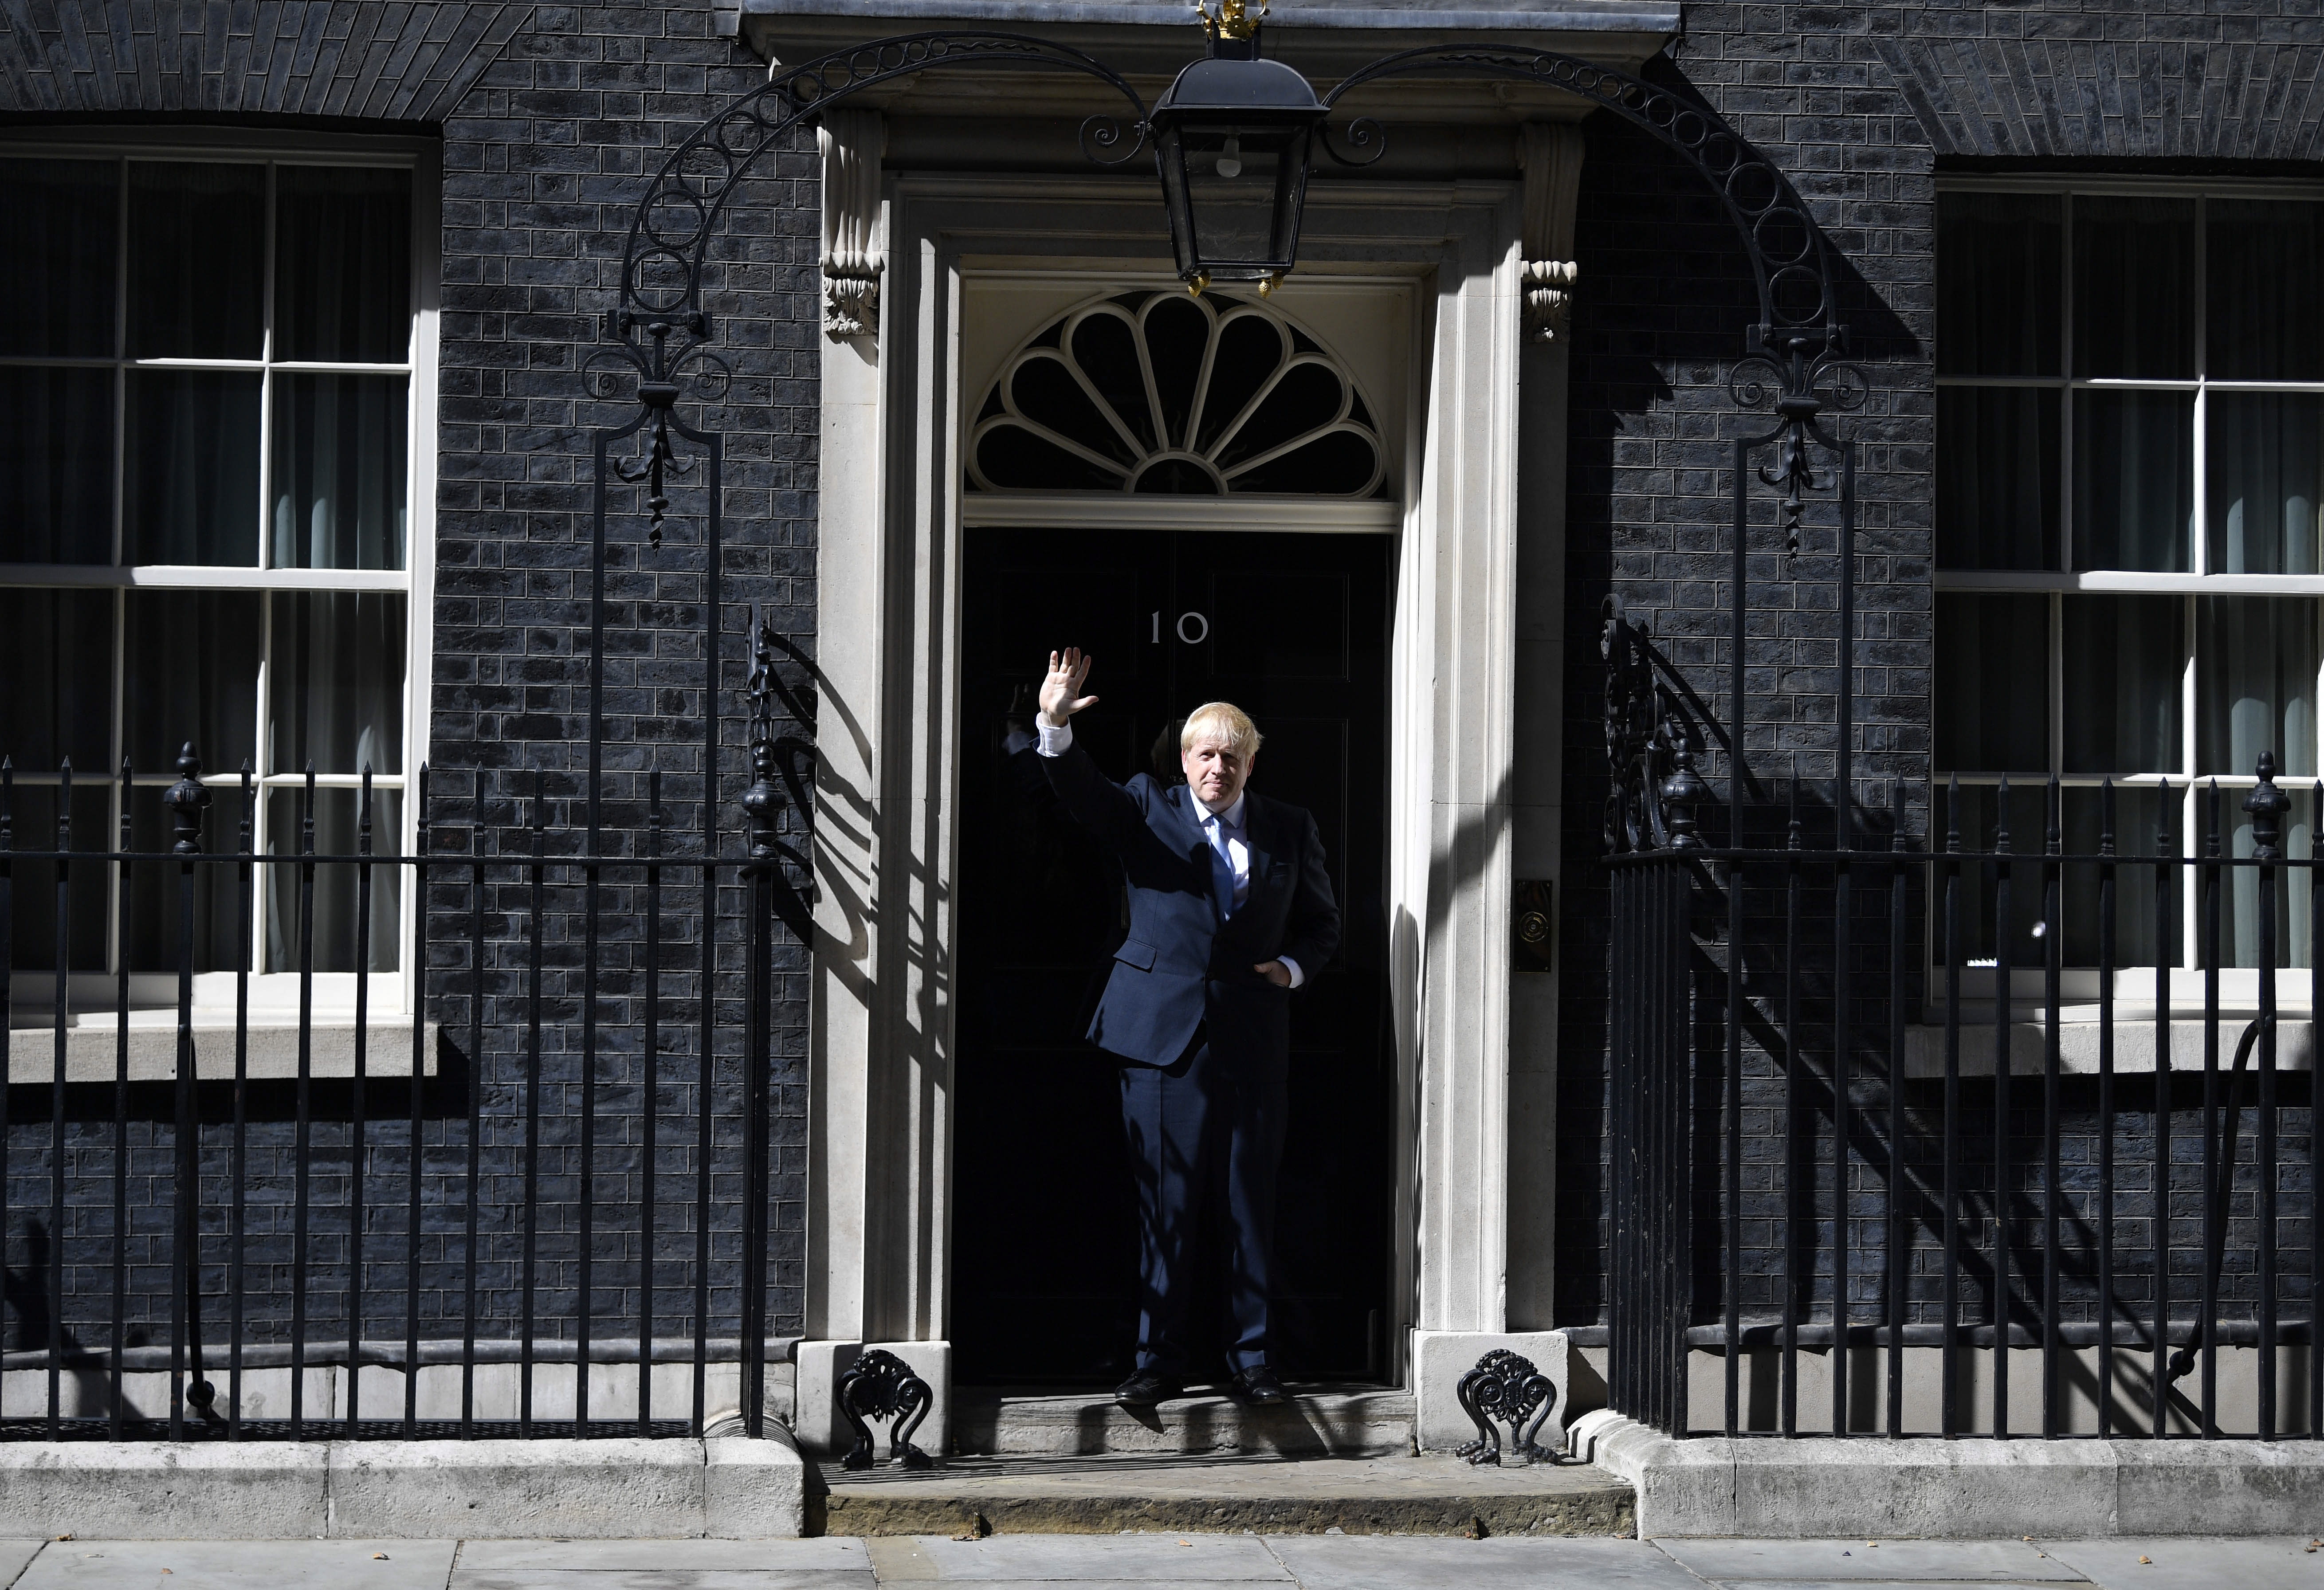 epa07737699 British Prime Minister Boris Johnson waves as he enters 10 Downing Street following his appointment by the Queen in London, Britain, 24 July 2019. Former London mayor and foreign secretary Boris Johnson is taking over the post after his election as party leader was announced the previous day. Theresa May stepped down as British Prime Minister following her resignation as Conservative Party leader on 07 June.  EPA/NEIL HALL